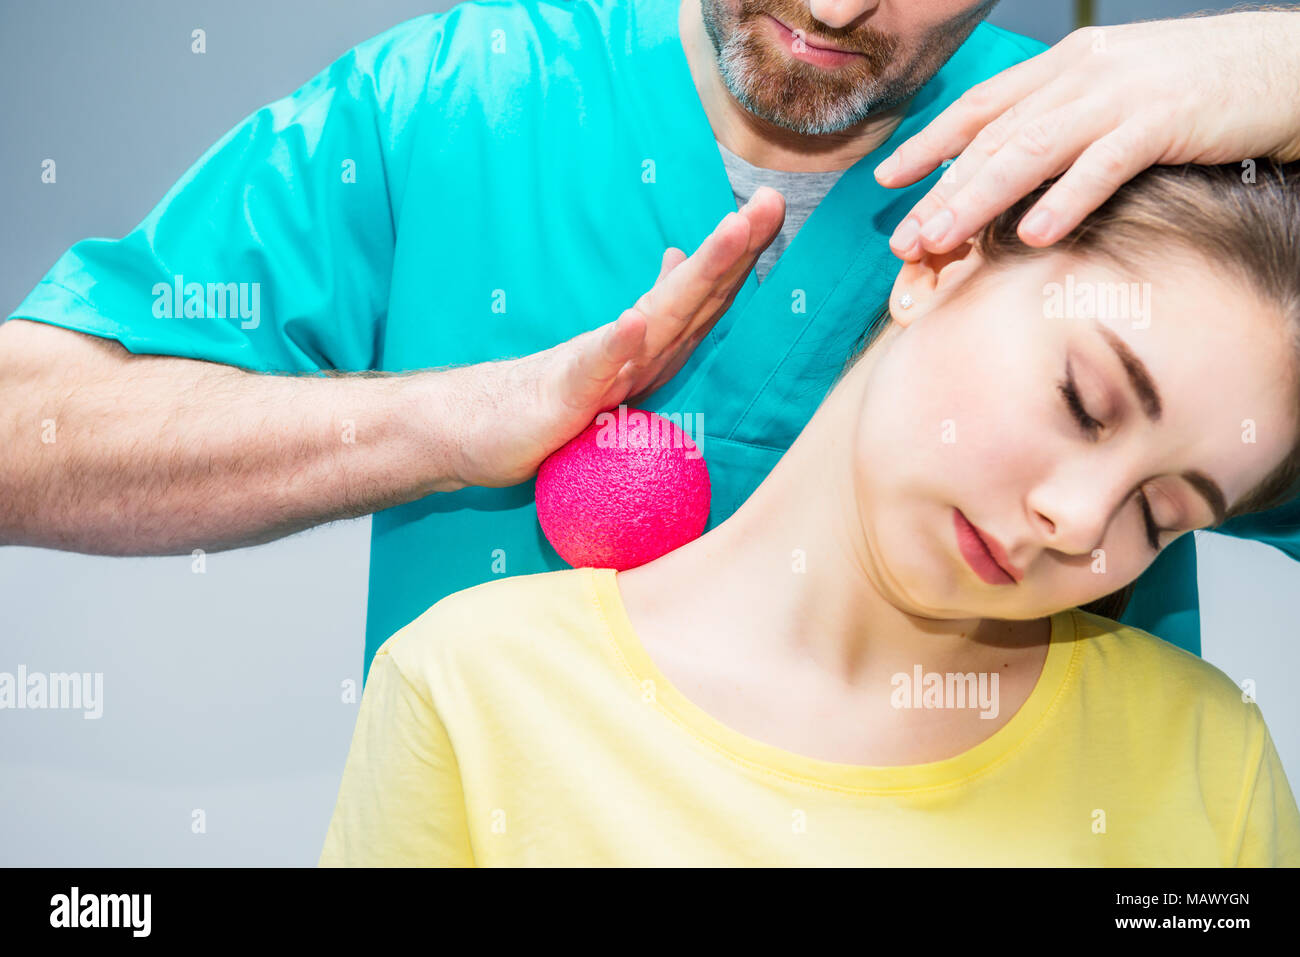 Woman at the physiotherapy receiving ball massage from therapist. A chiropractor treats patient's shoulder, neck in medical office. Neurology, Osteopa Stock Photo